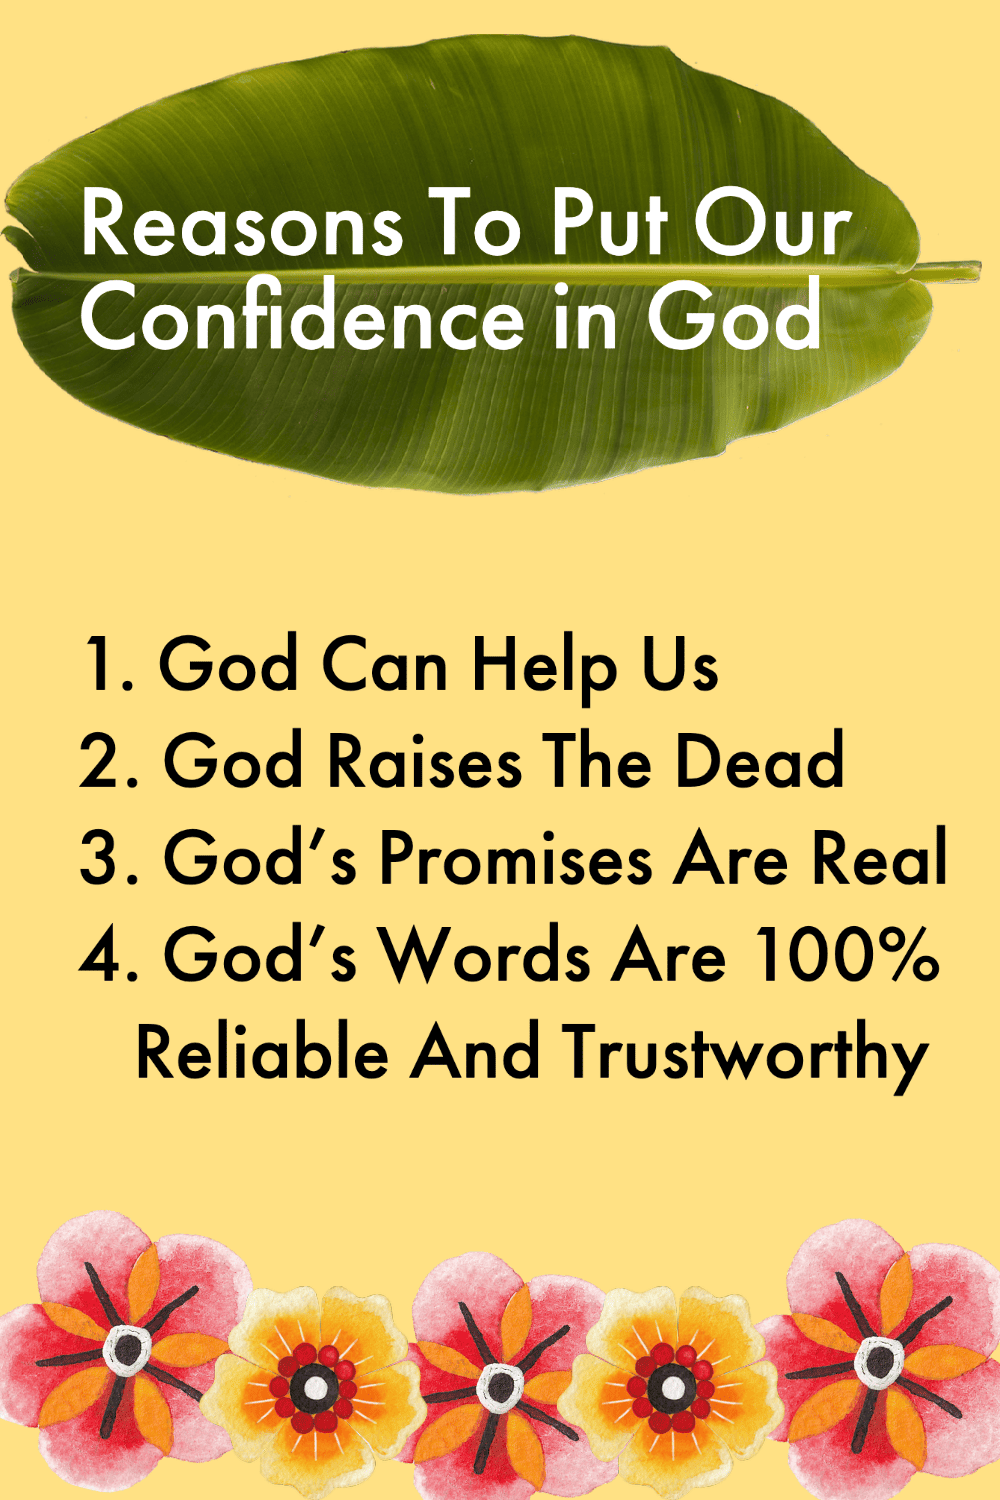 Bible verses about confidence